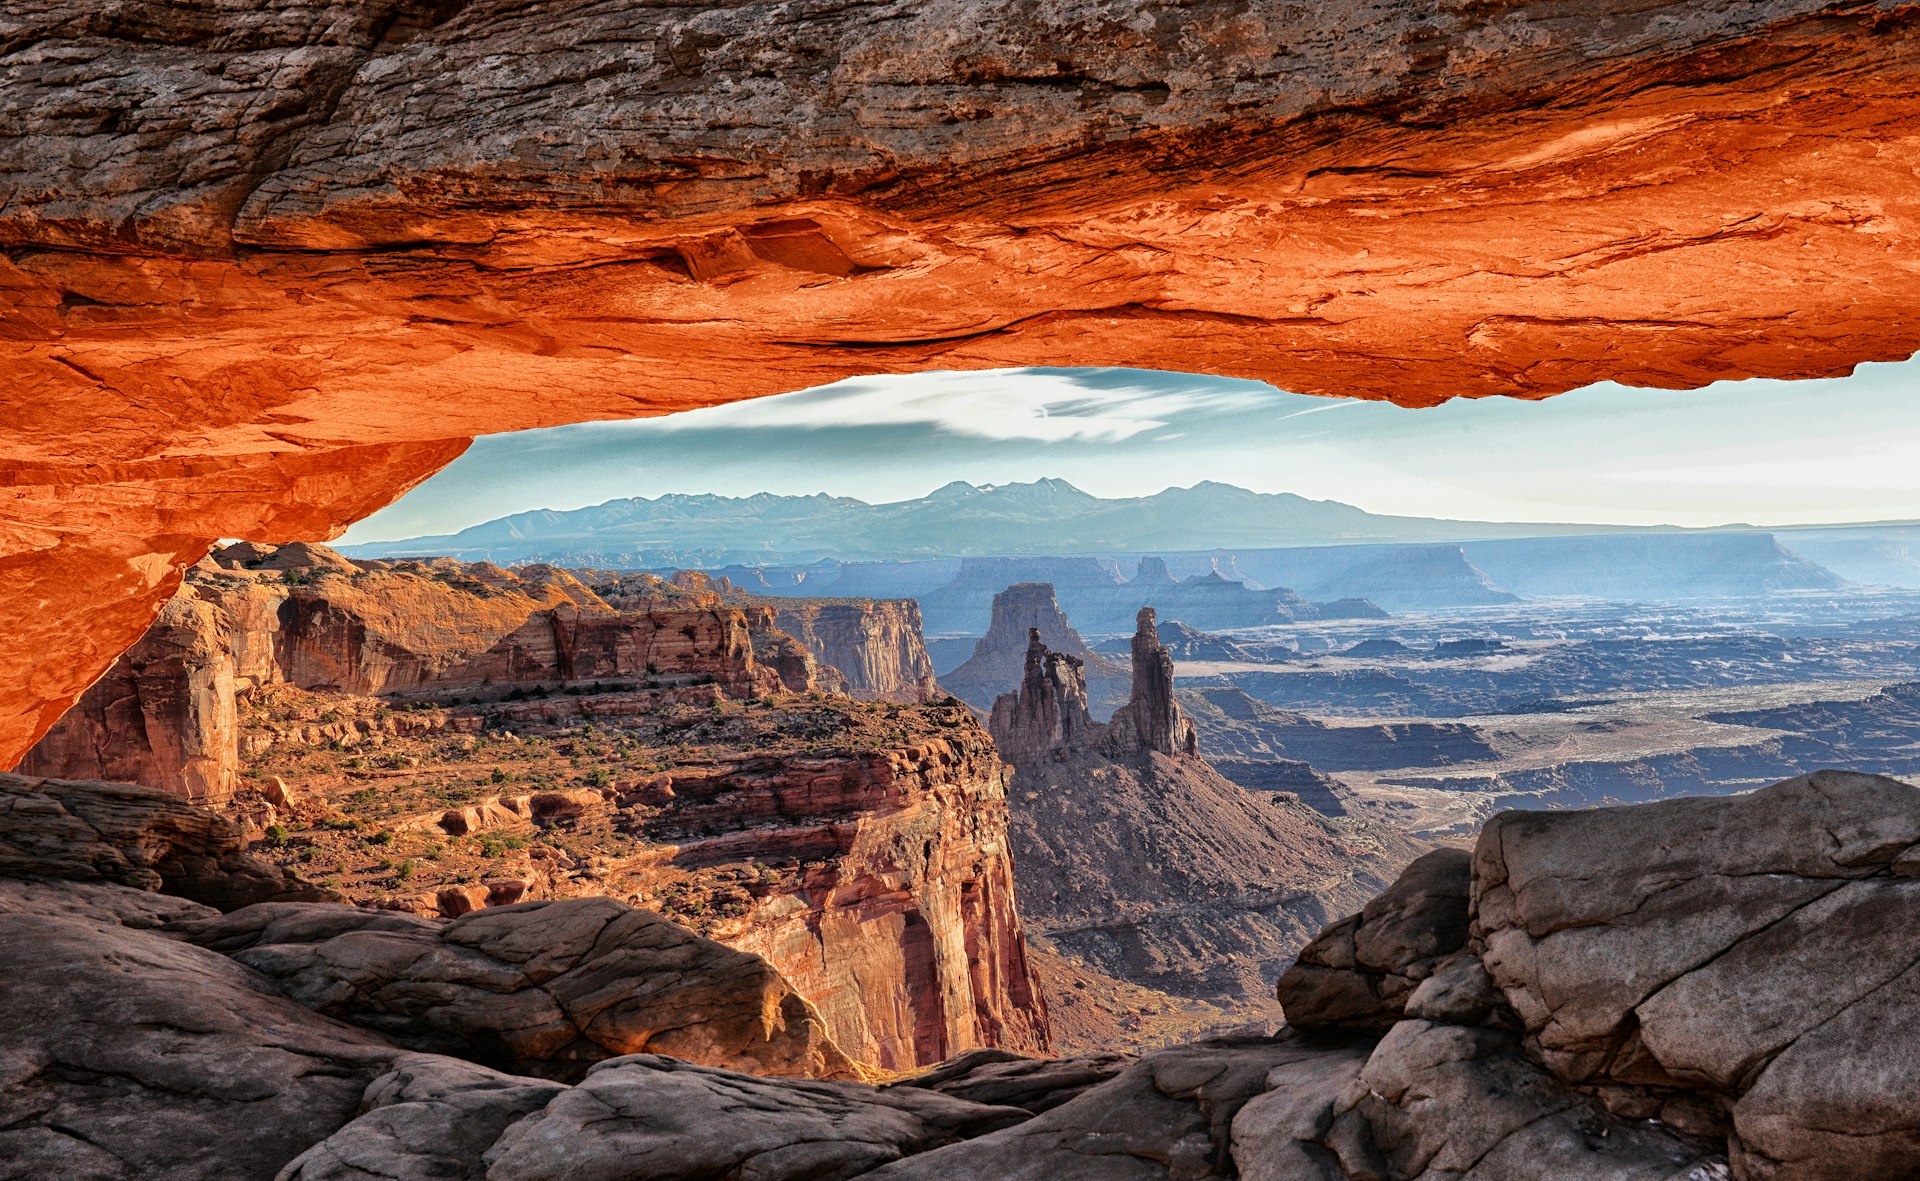 A view through the Mesa Arch in Canyonlands National Park at sunrise